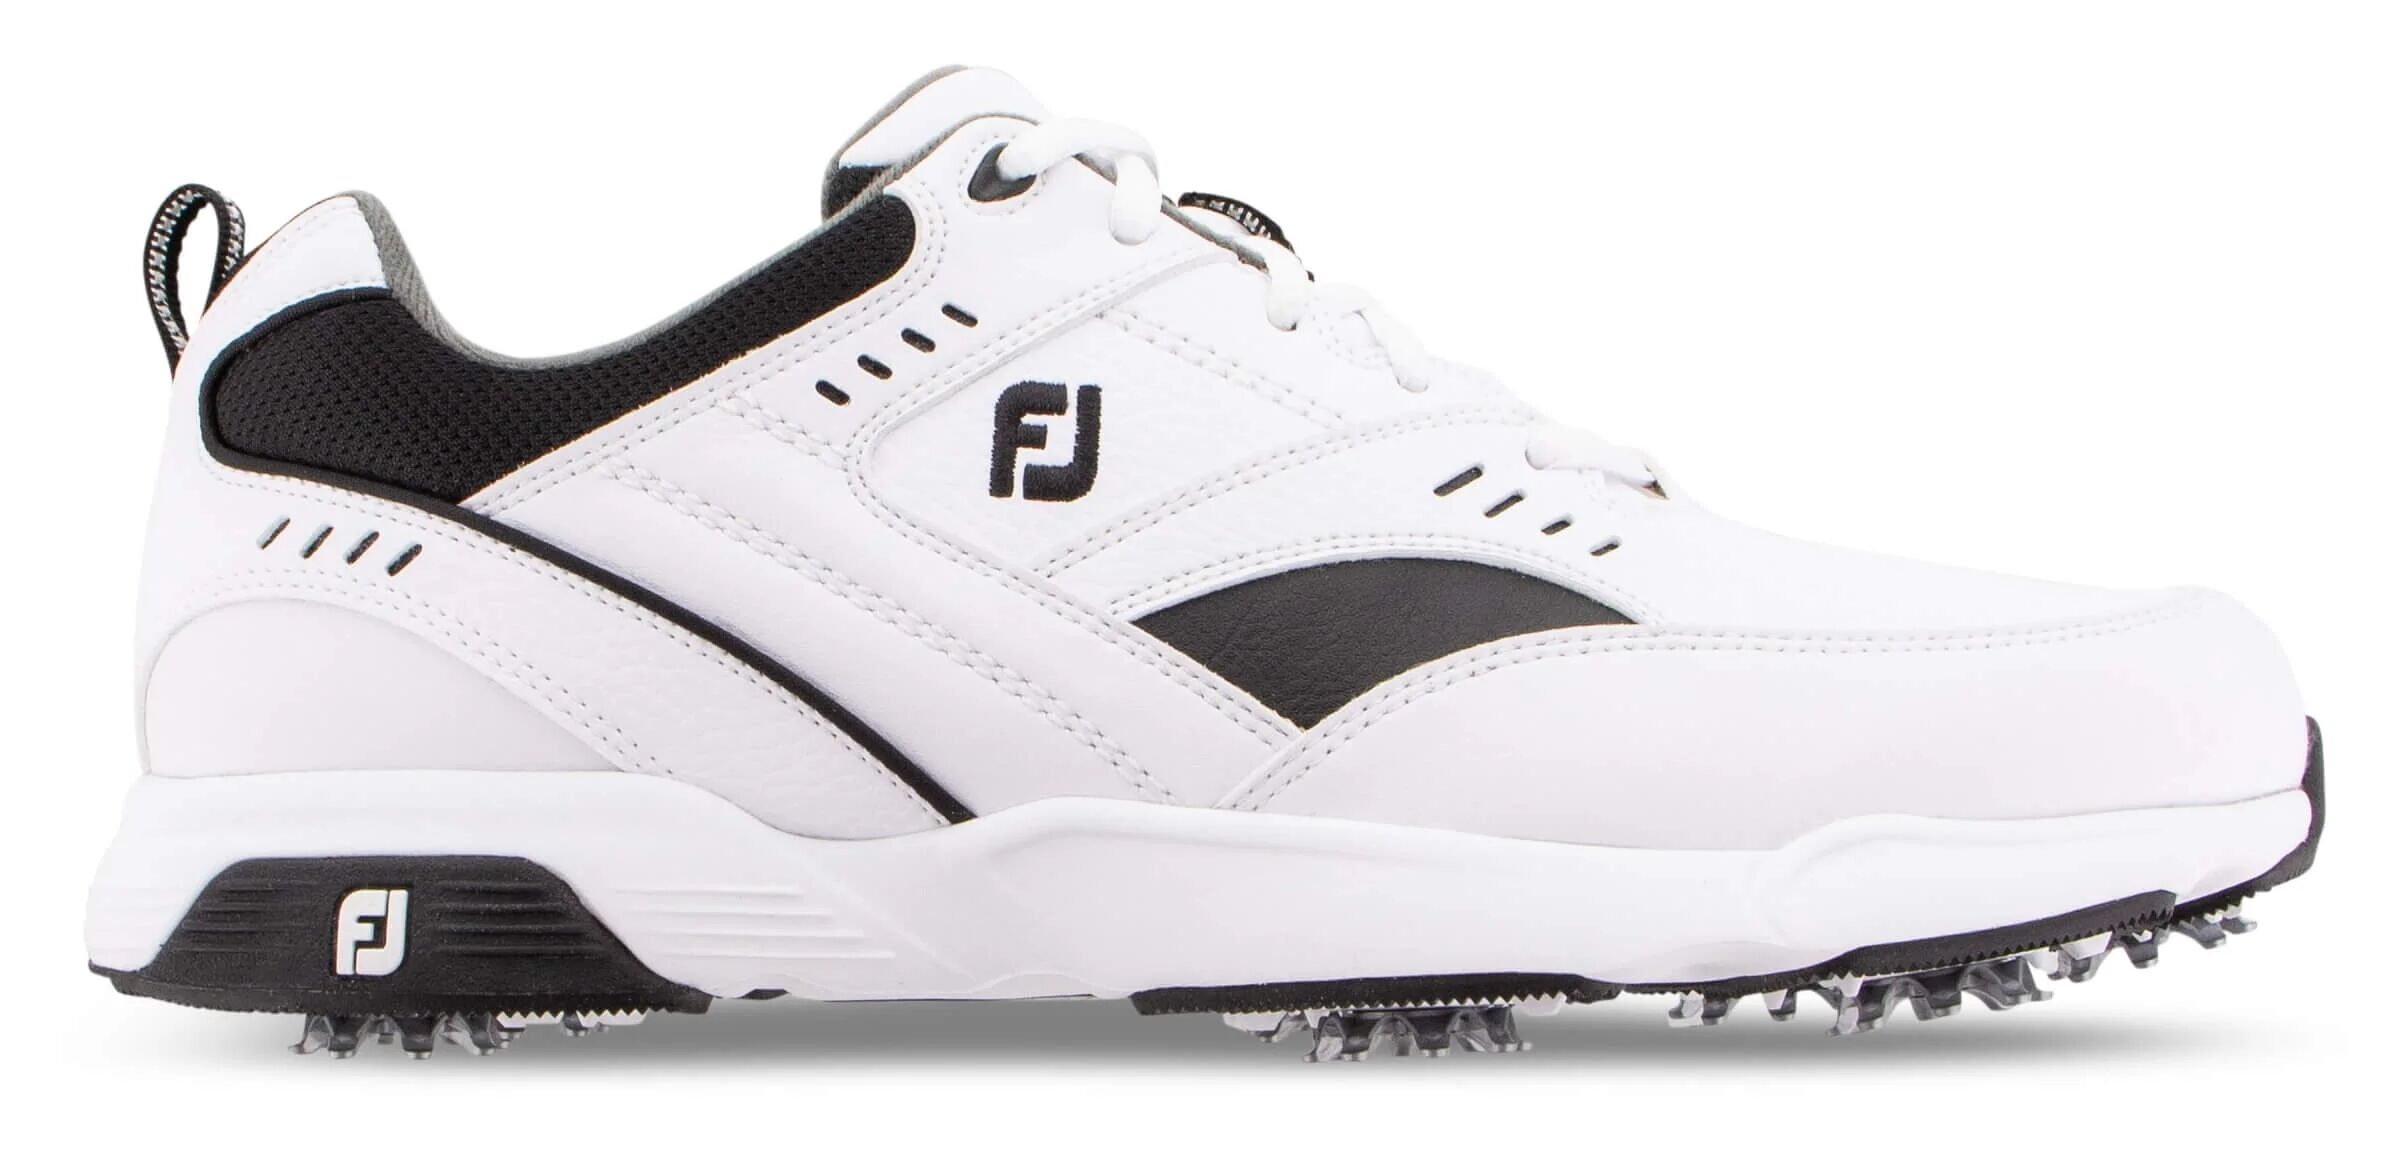 FootJoy Athletic Specialty Golf Shoes White -  - 11.5 - W